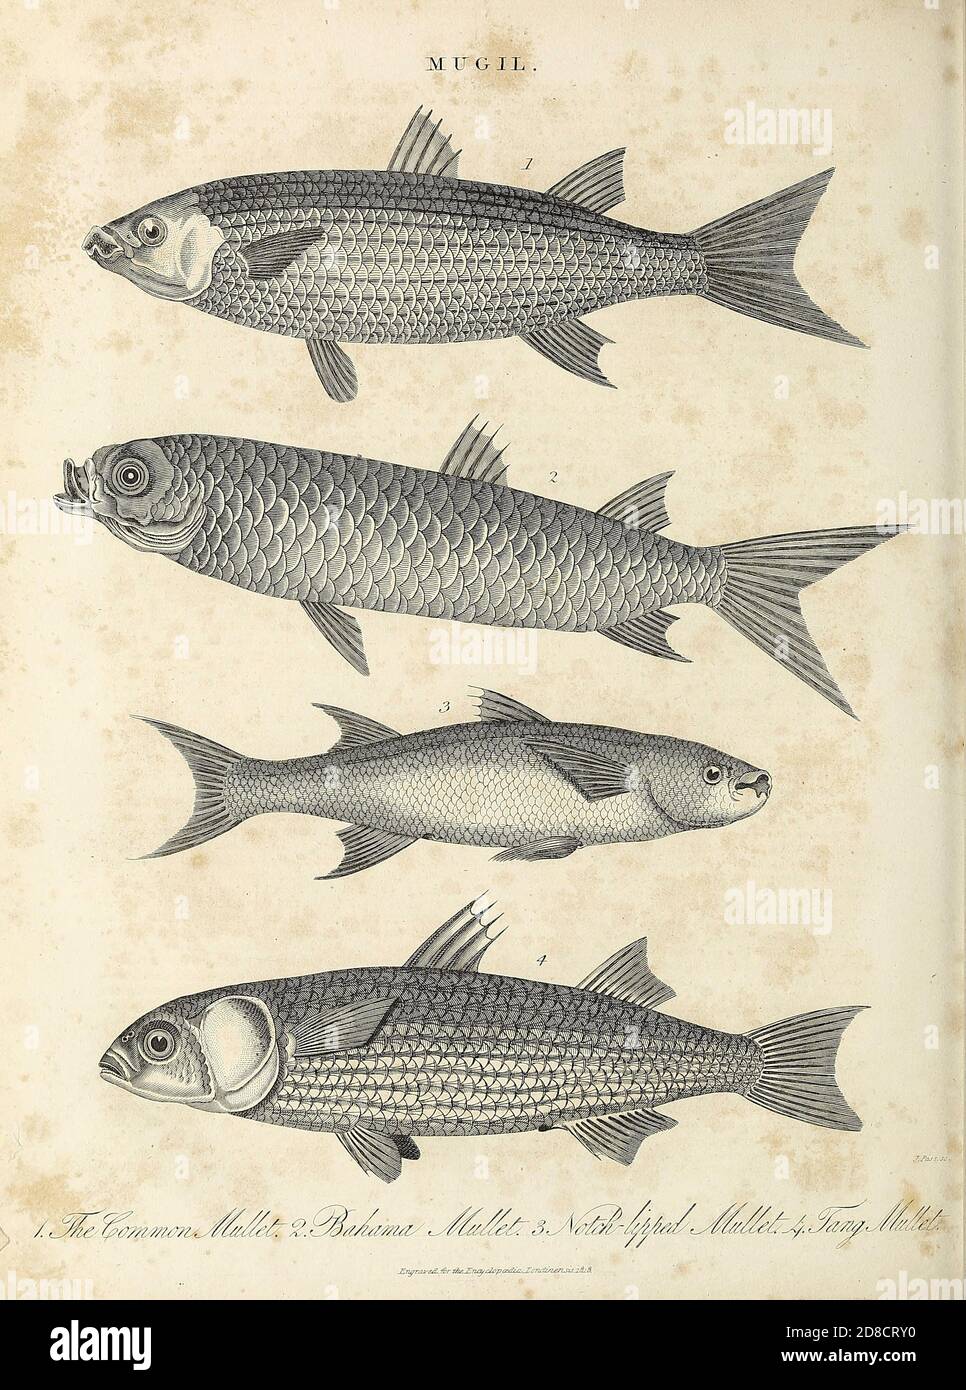 Mugil is a genus of mullet in the family Mugilidae found worldwide in tropical and temperate coastal marine waters, but also entering estuaries and rivers. Copperplate engraving From the Encyclopaedia Londinensis or, Universal dictionary of arts, sciences, and literature; Volume XVI;  Edited by Wilkes, John. Published in London in 1819 Stock Photo